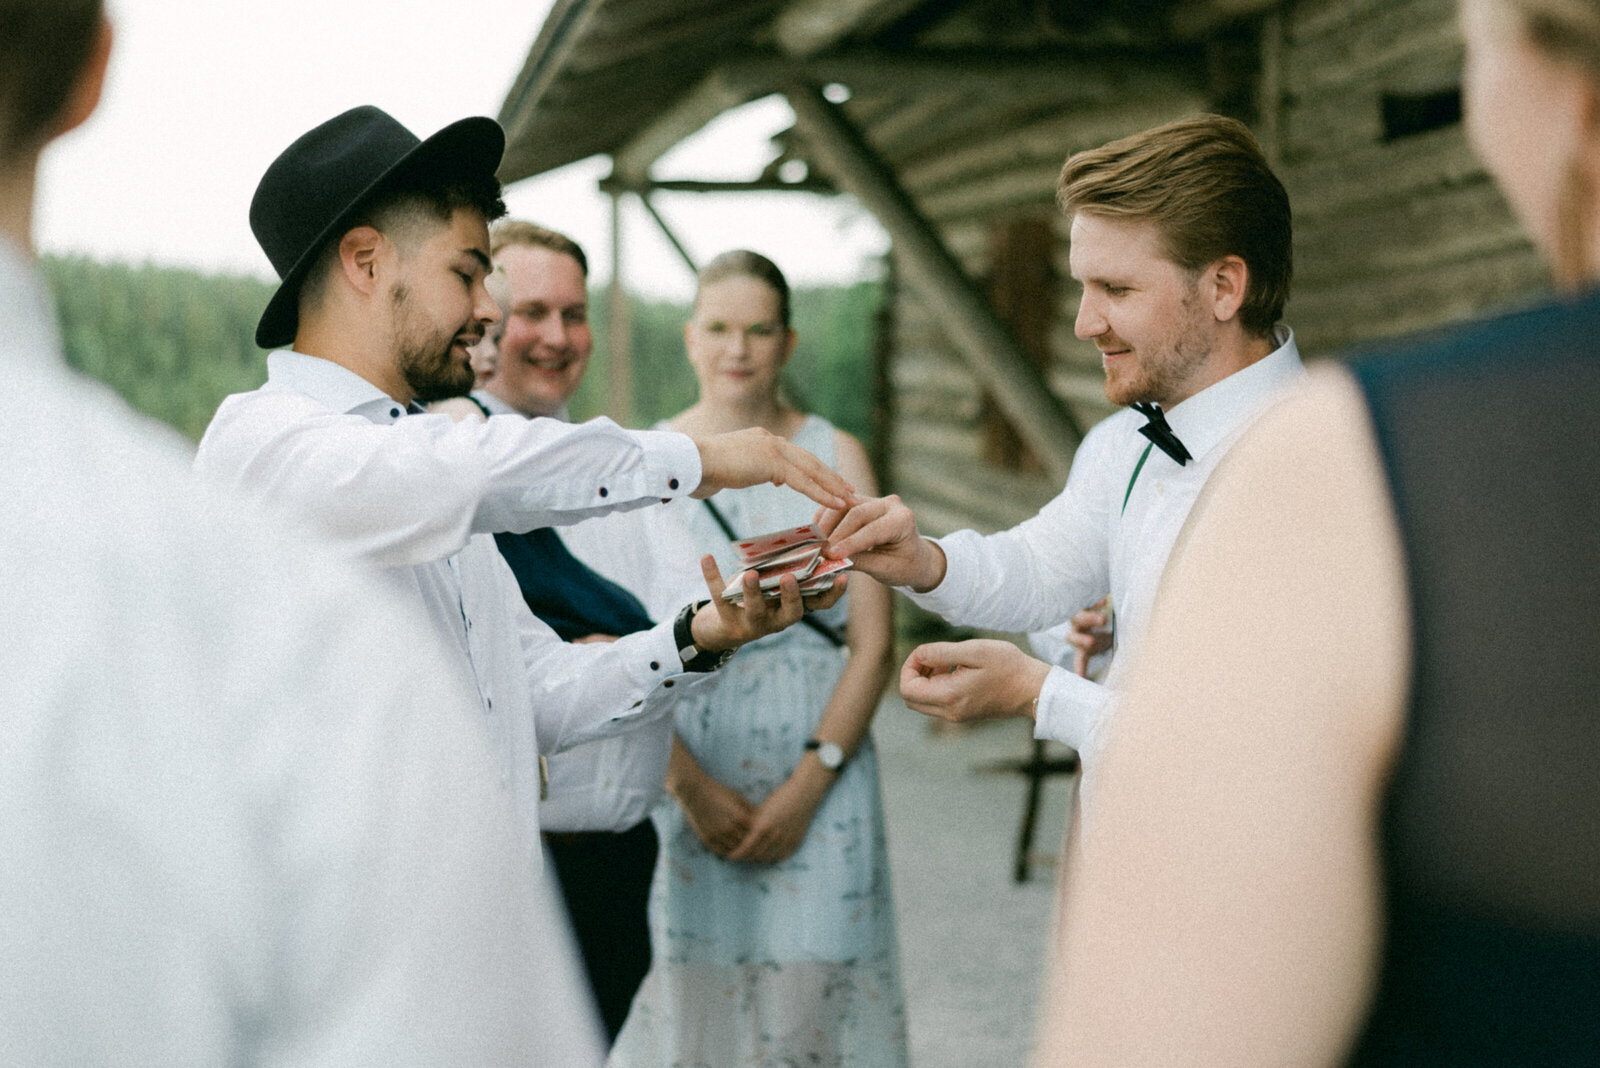 A magician showing tricks to the guests in the wedding in an image captured by wedding photographer Hannika Gabrielsson.